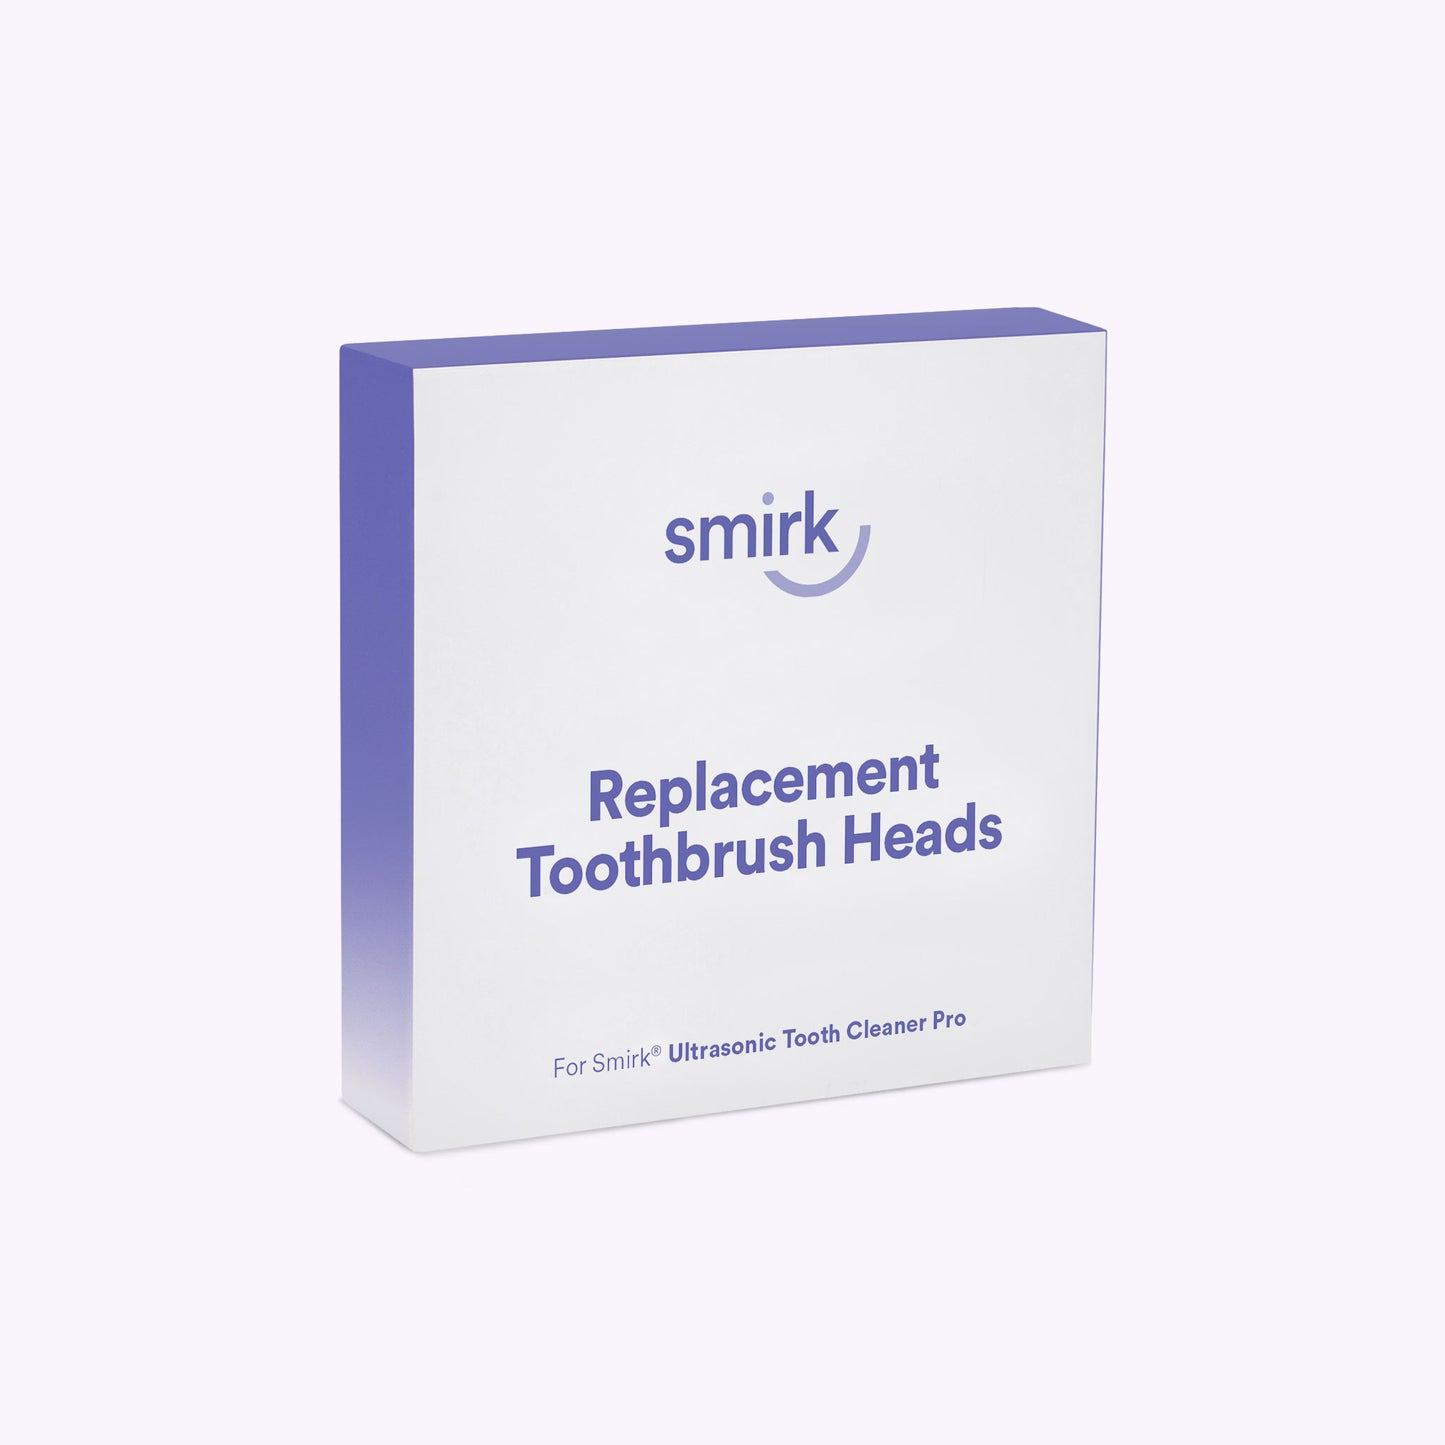 Toothbrush Heads for Ultrasonic Tooth Cleaner Pro